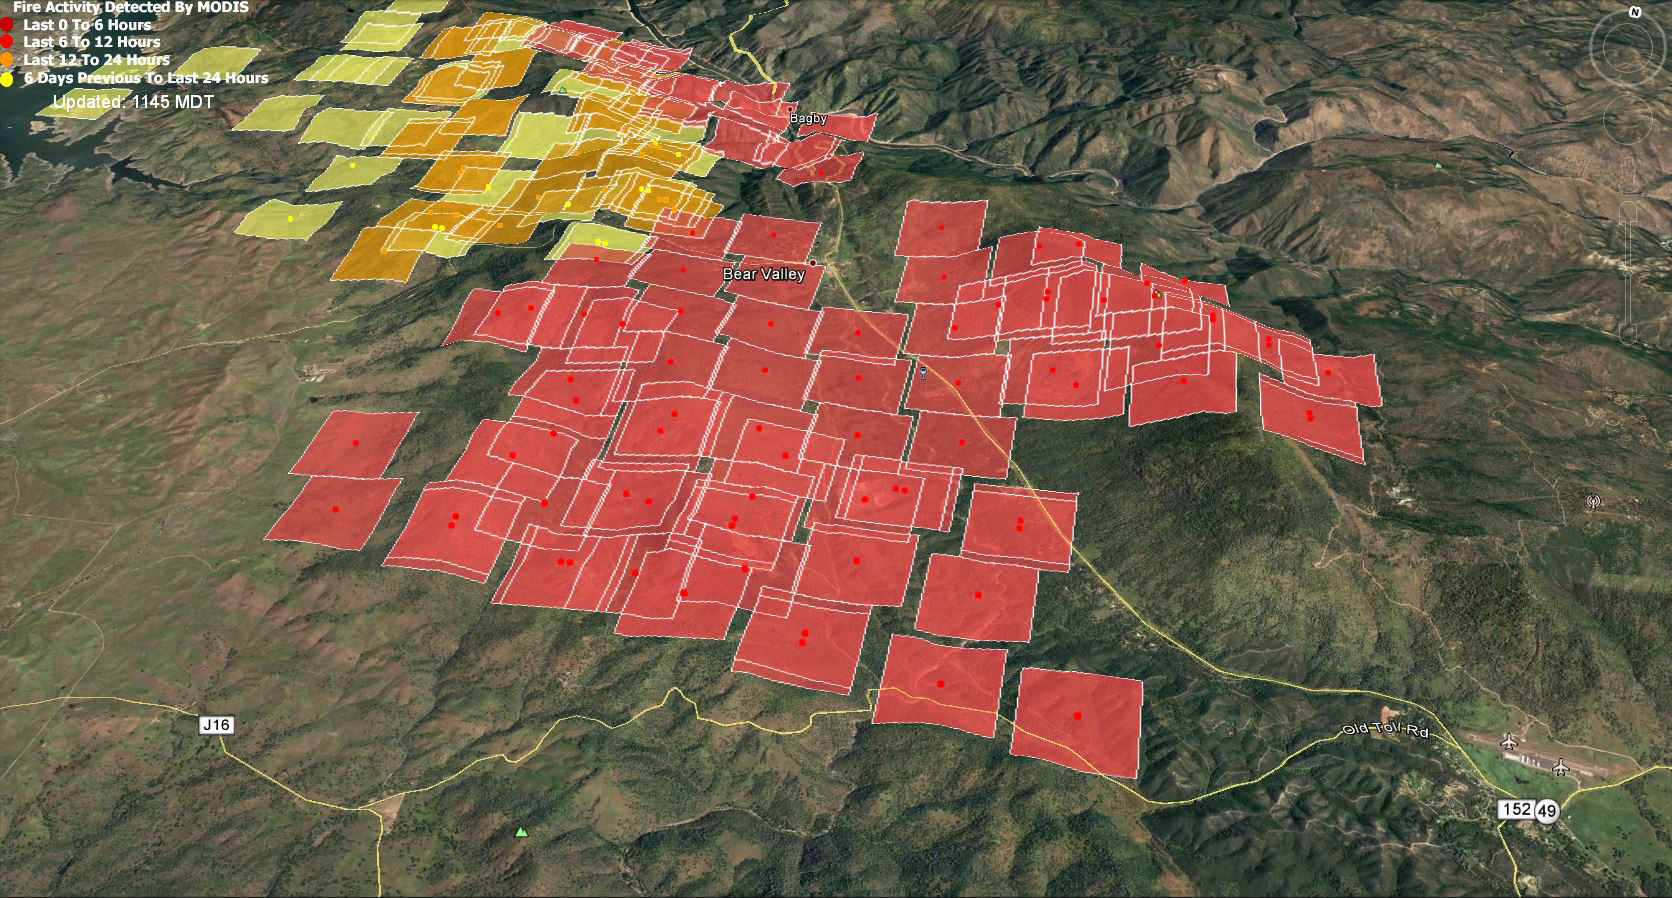 modis map 1045 am detwiler fire in mariposa county tuesday july 18 2017